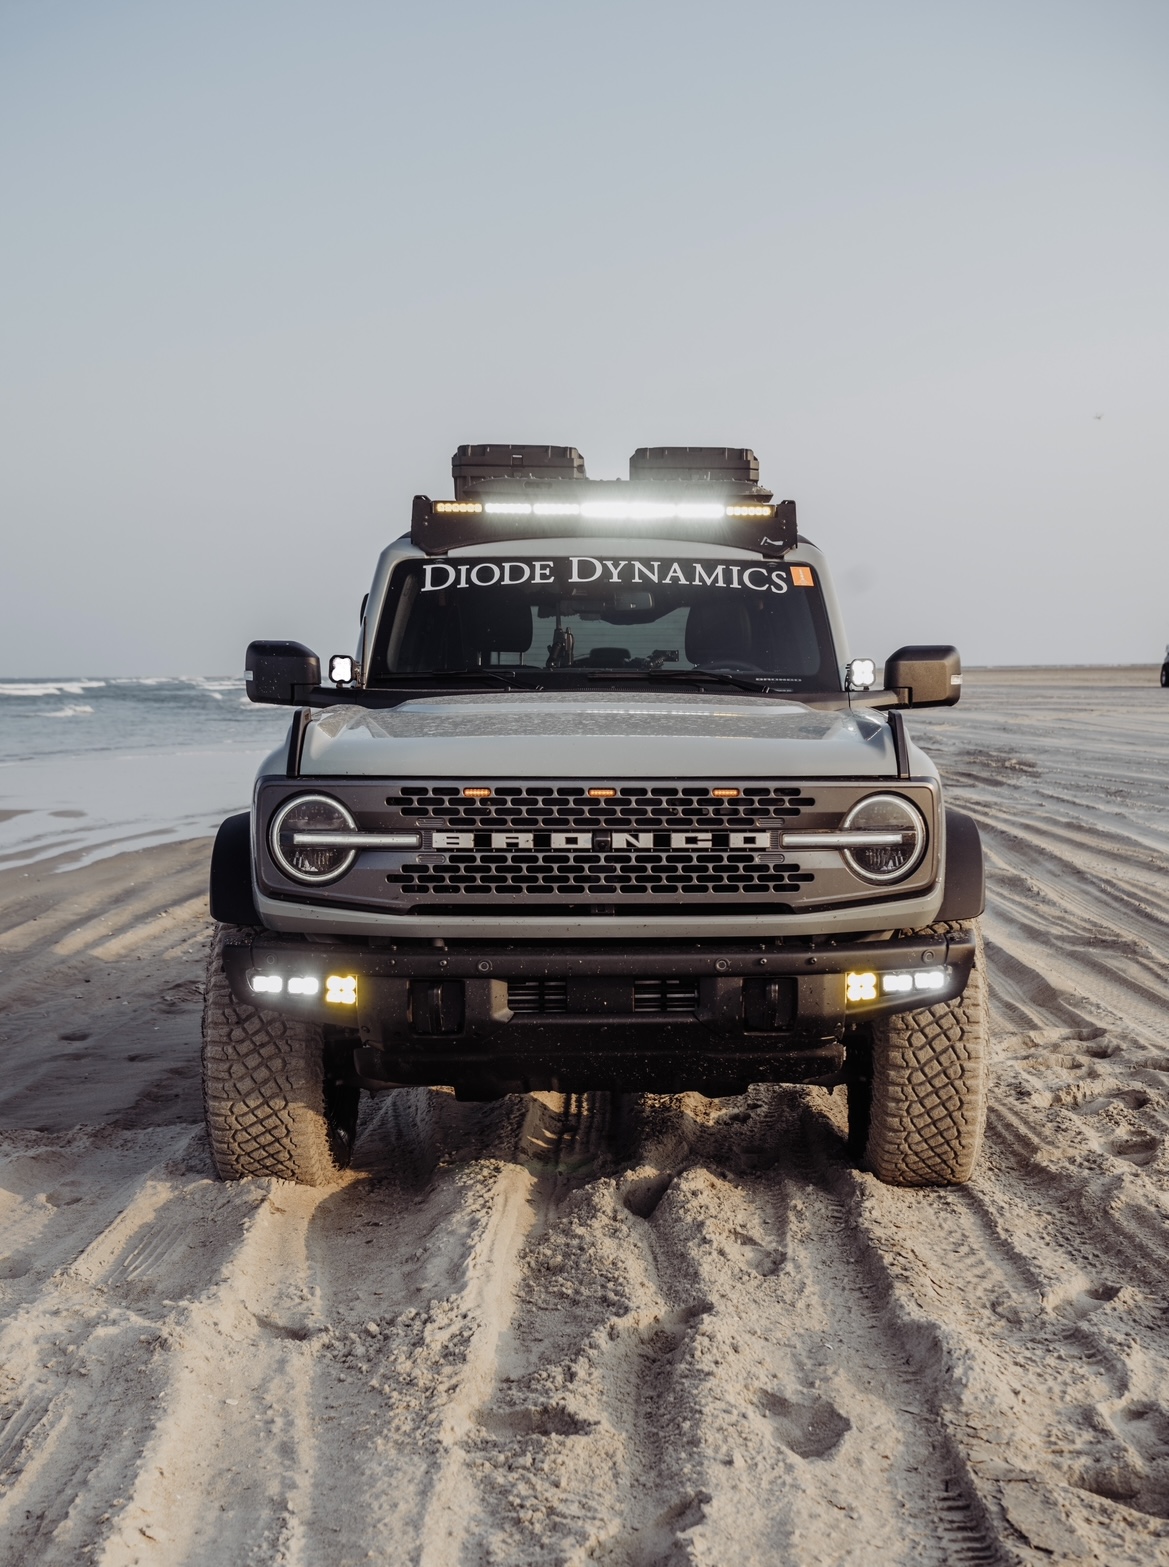 Ford Bronco Beachsquatch! Cruising the sand for the first time 3CCECFDF-D425-4D55-A5F2-42CB8484A89D